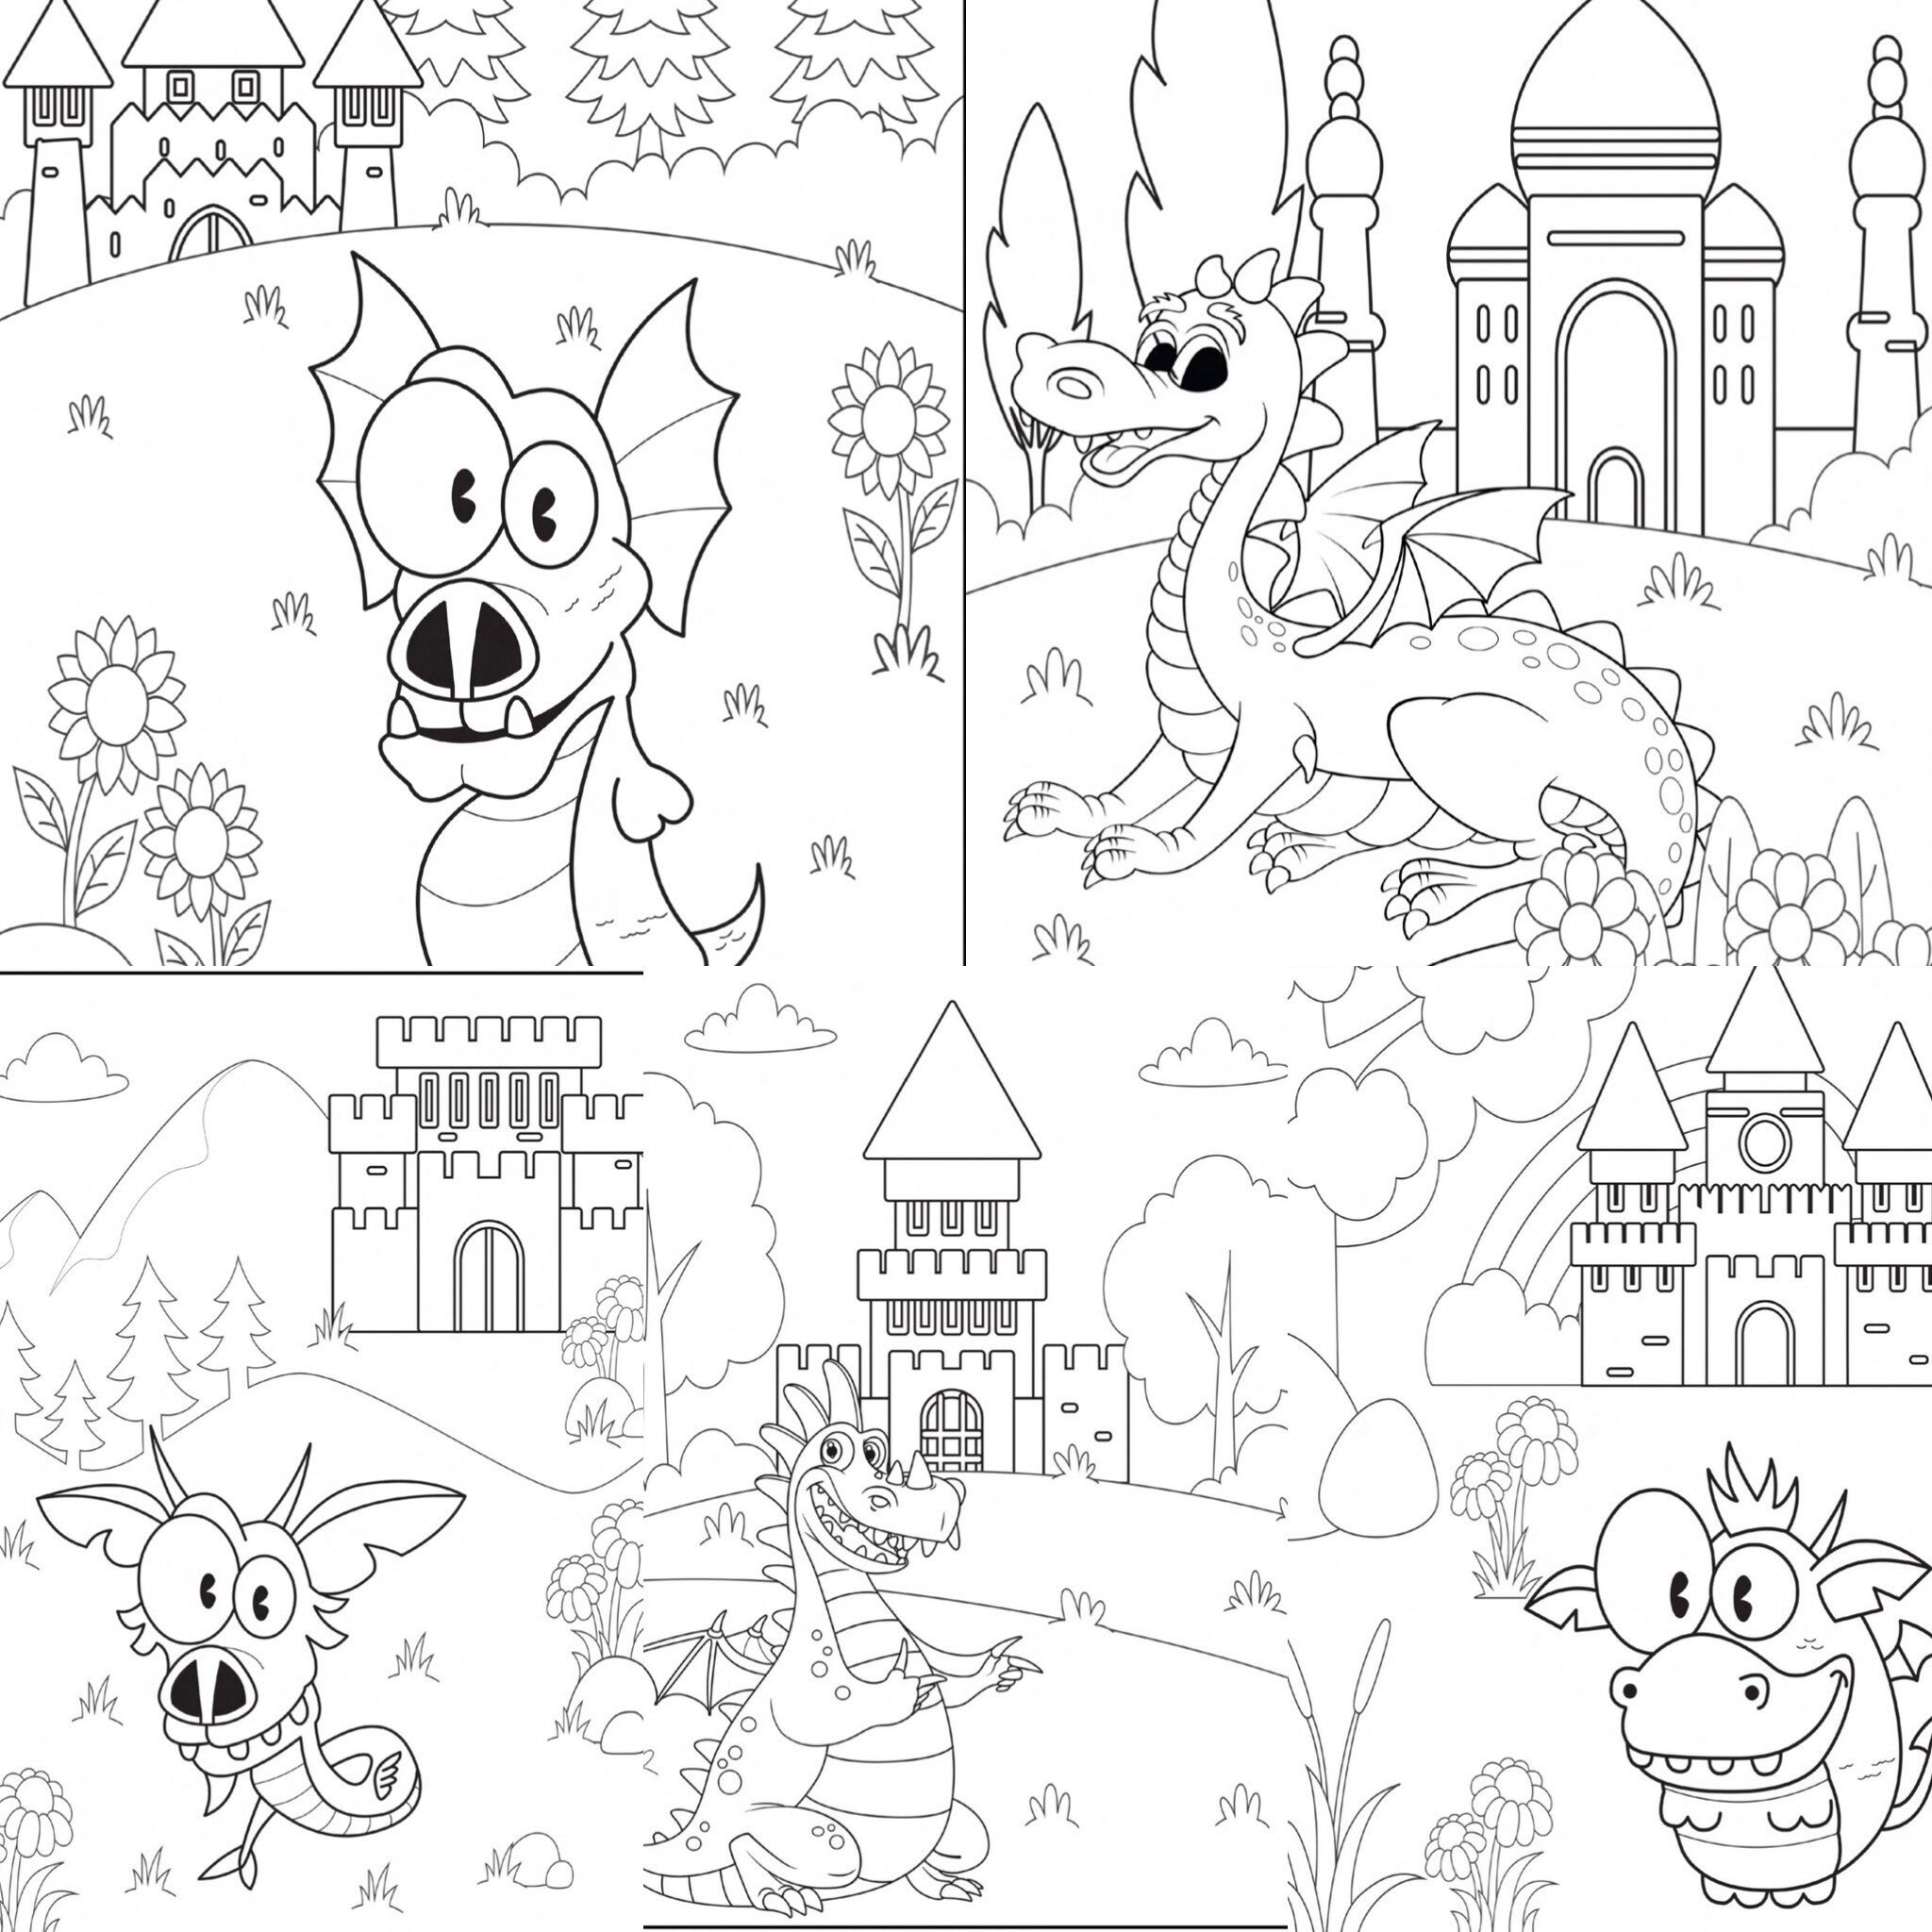 Dragon Coloring Pages 50 Printable Color Pages for | Etsy